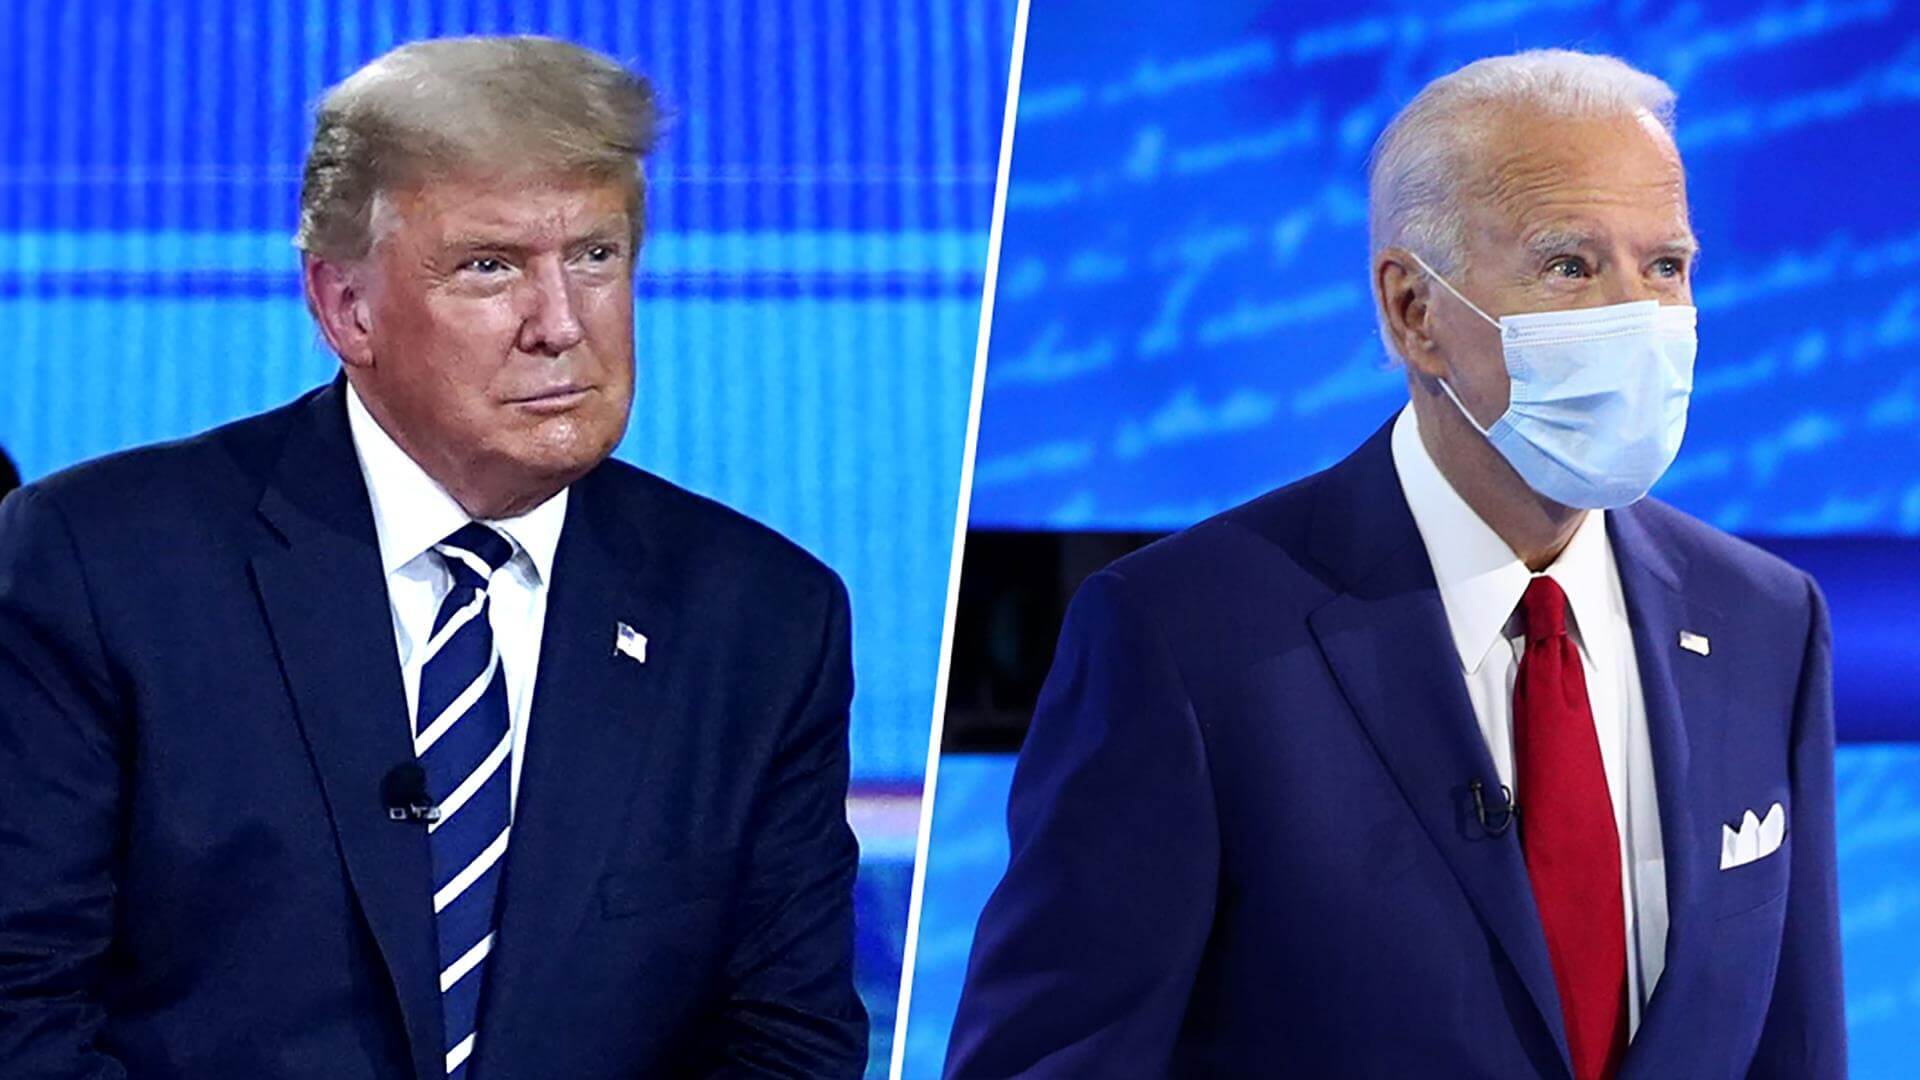 Trump and Biden Face Voters in Separate Town Halls in Lieu of Cancelled Debate